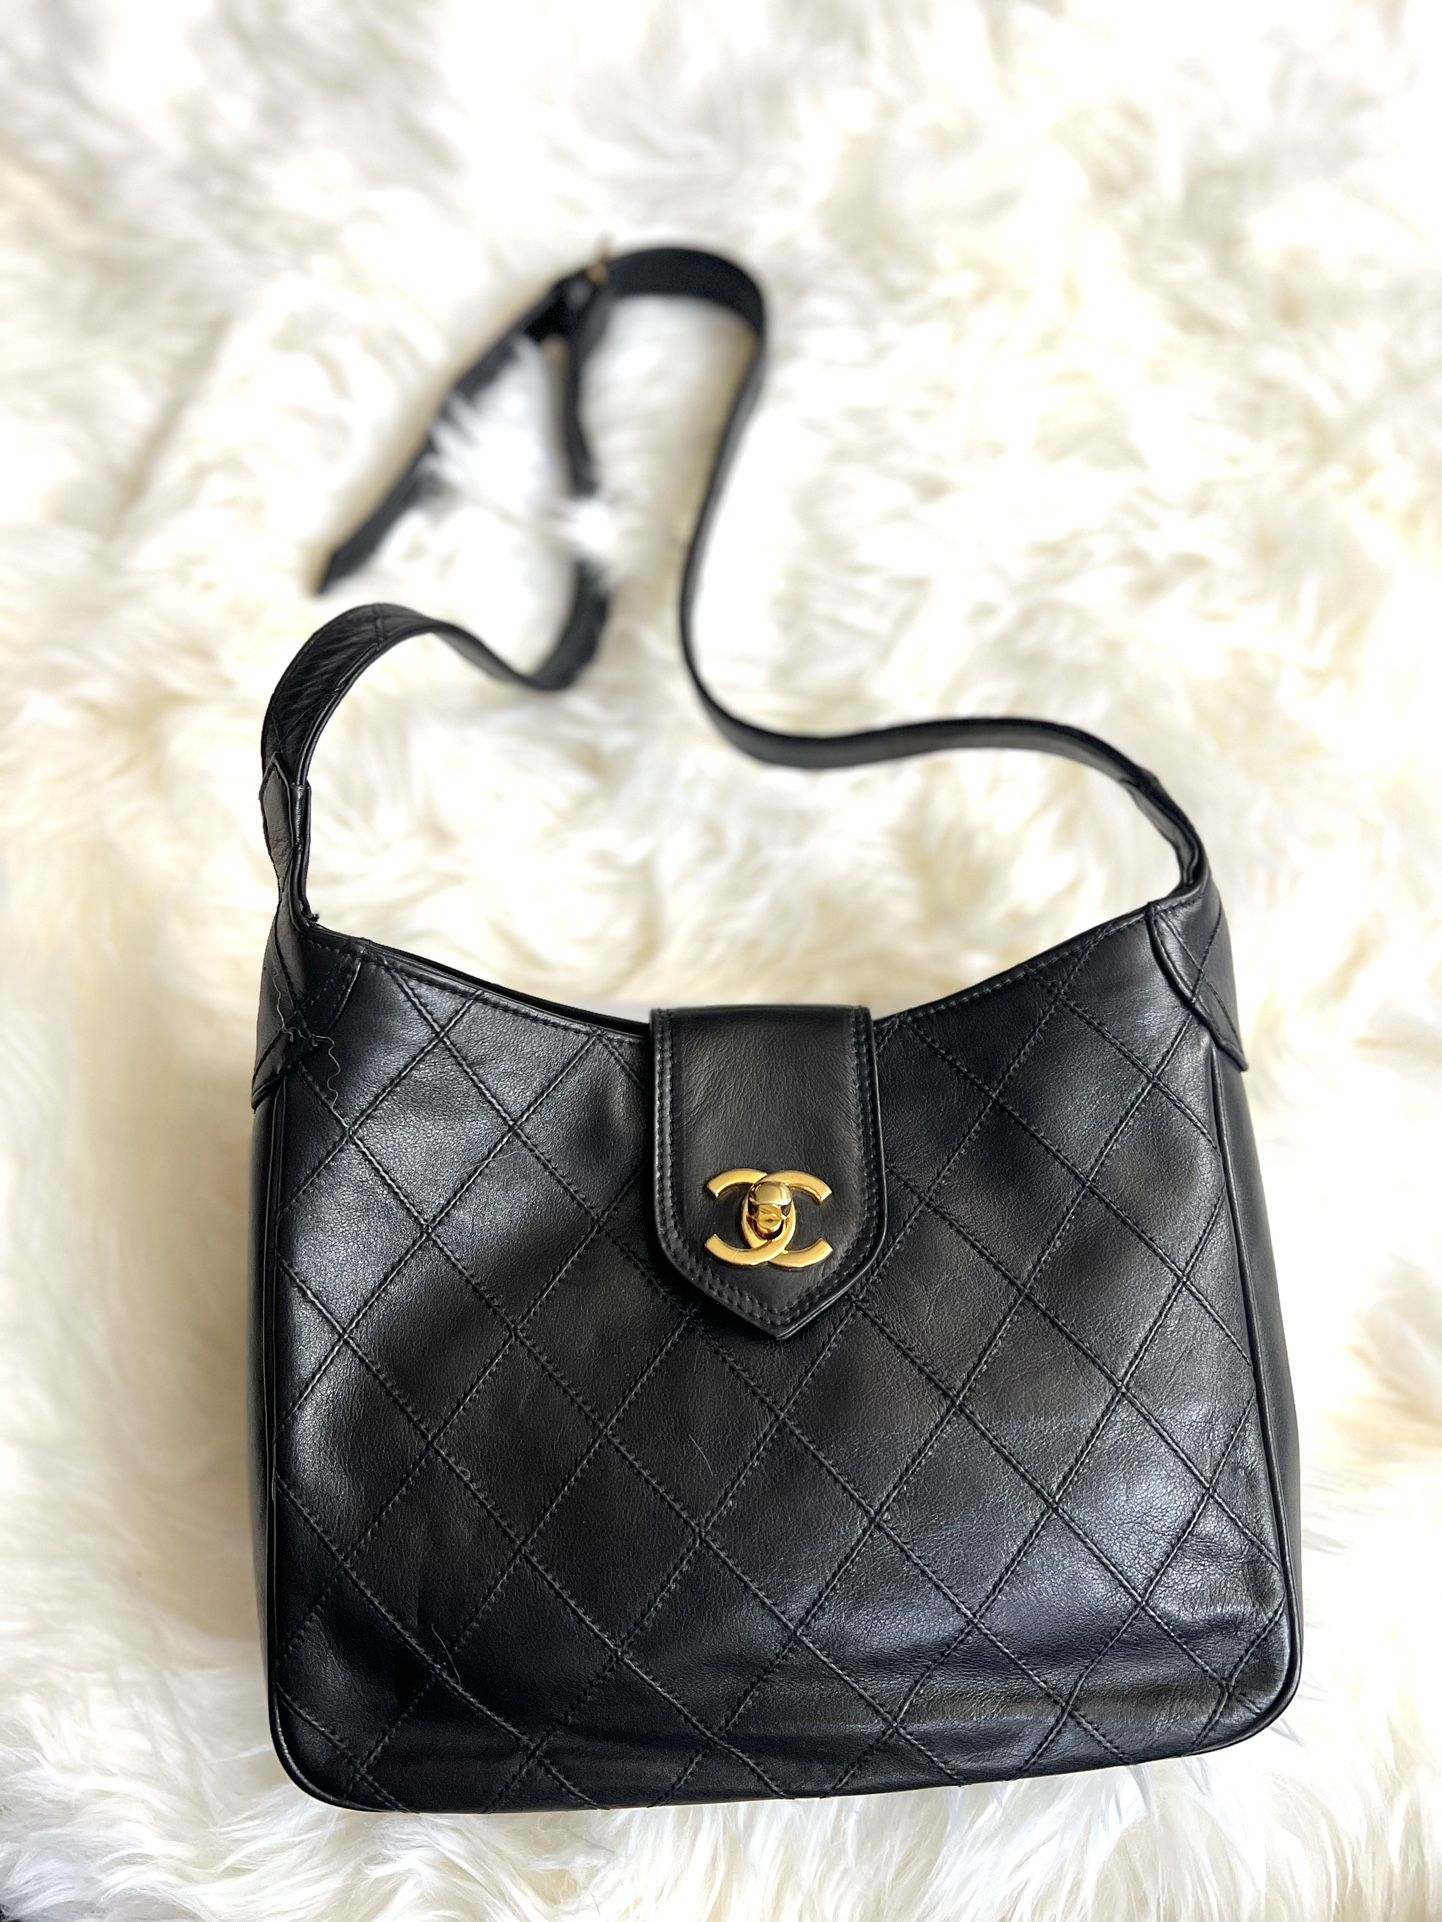 CHANEL CLASSIC FLAP EAST WEST CAVIAR SHOULDER BAG for Sale in Bronx, NY -  OfferUp